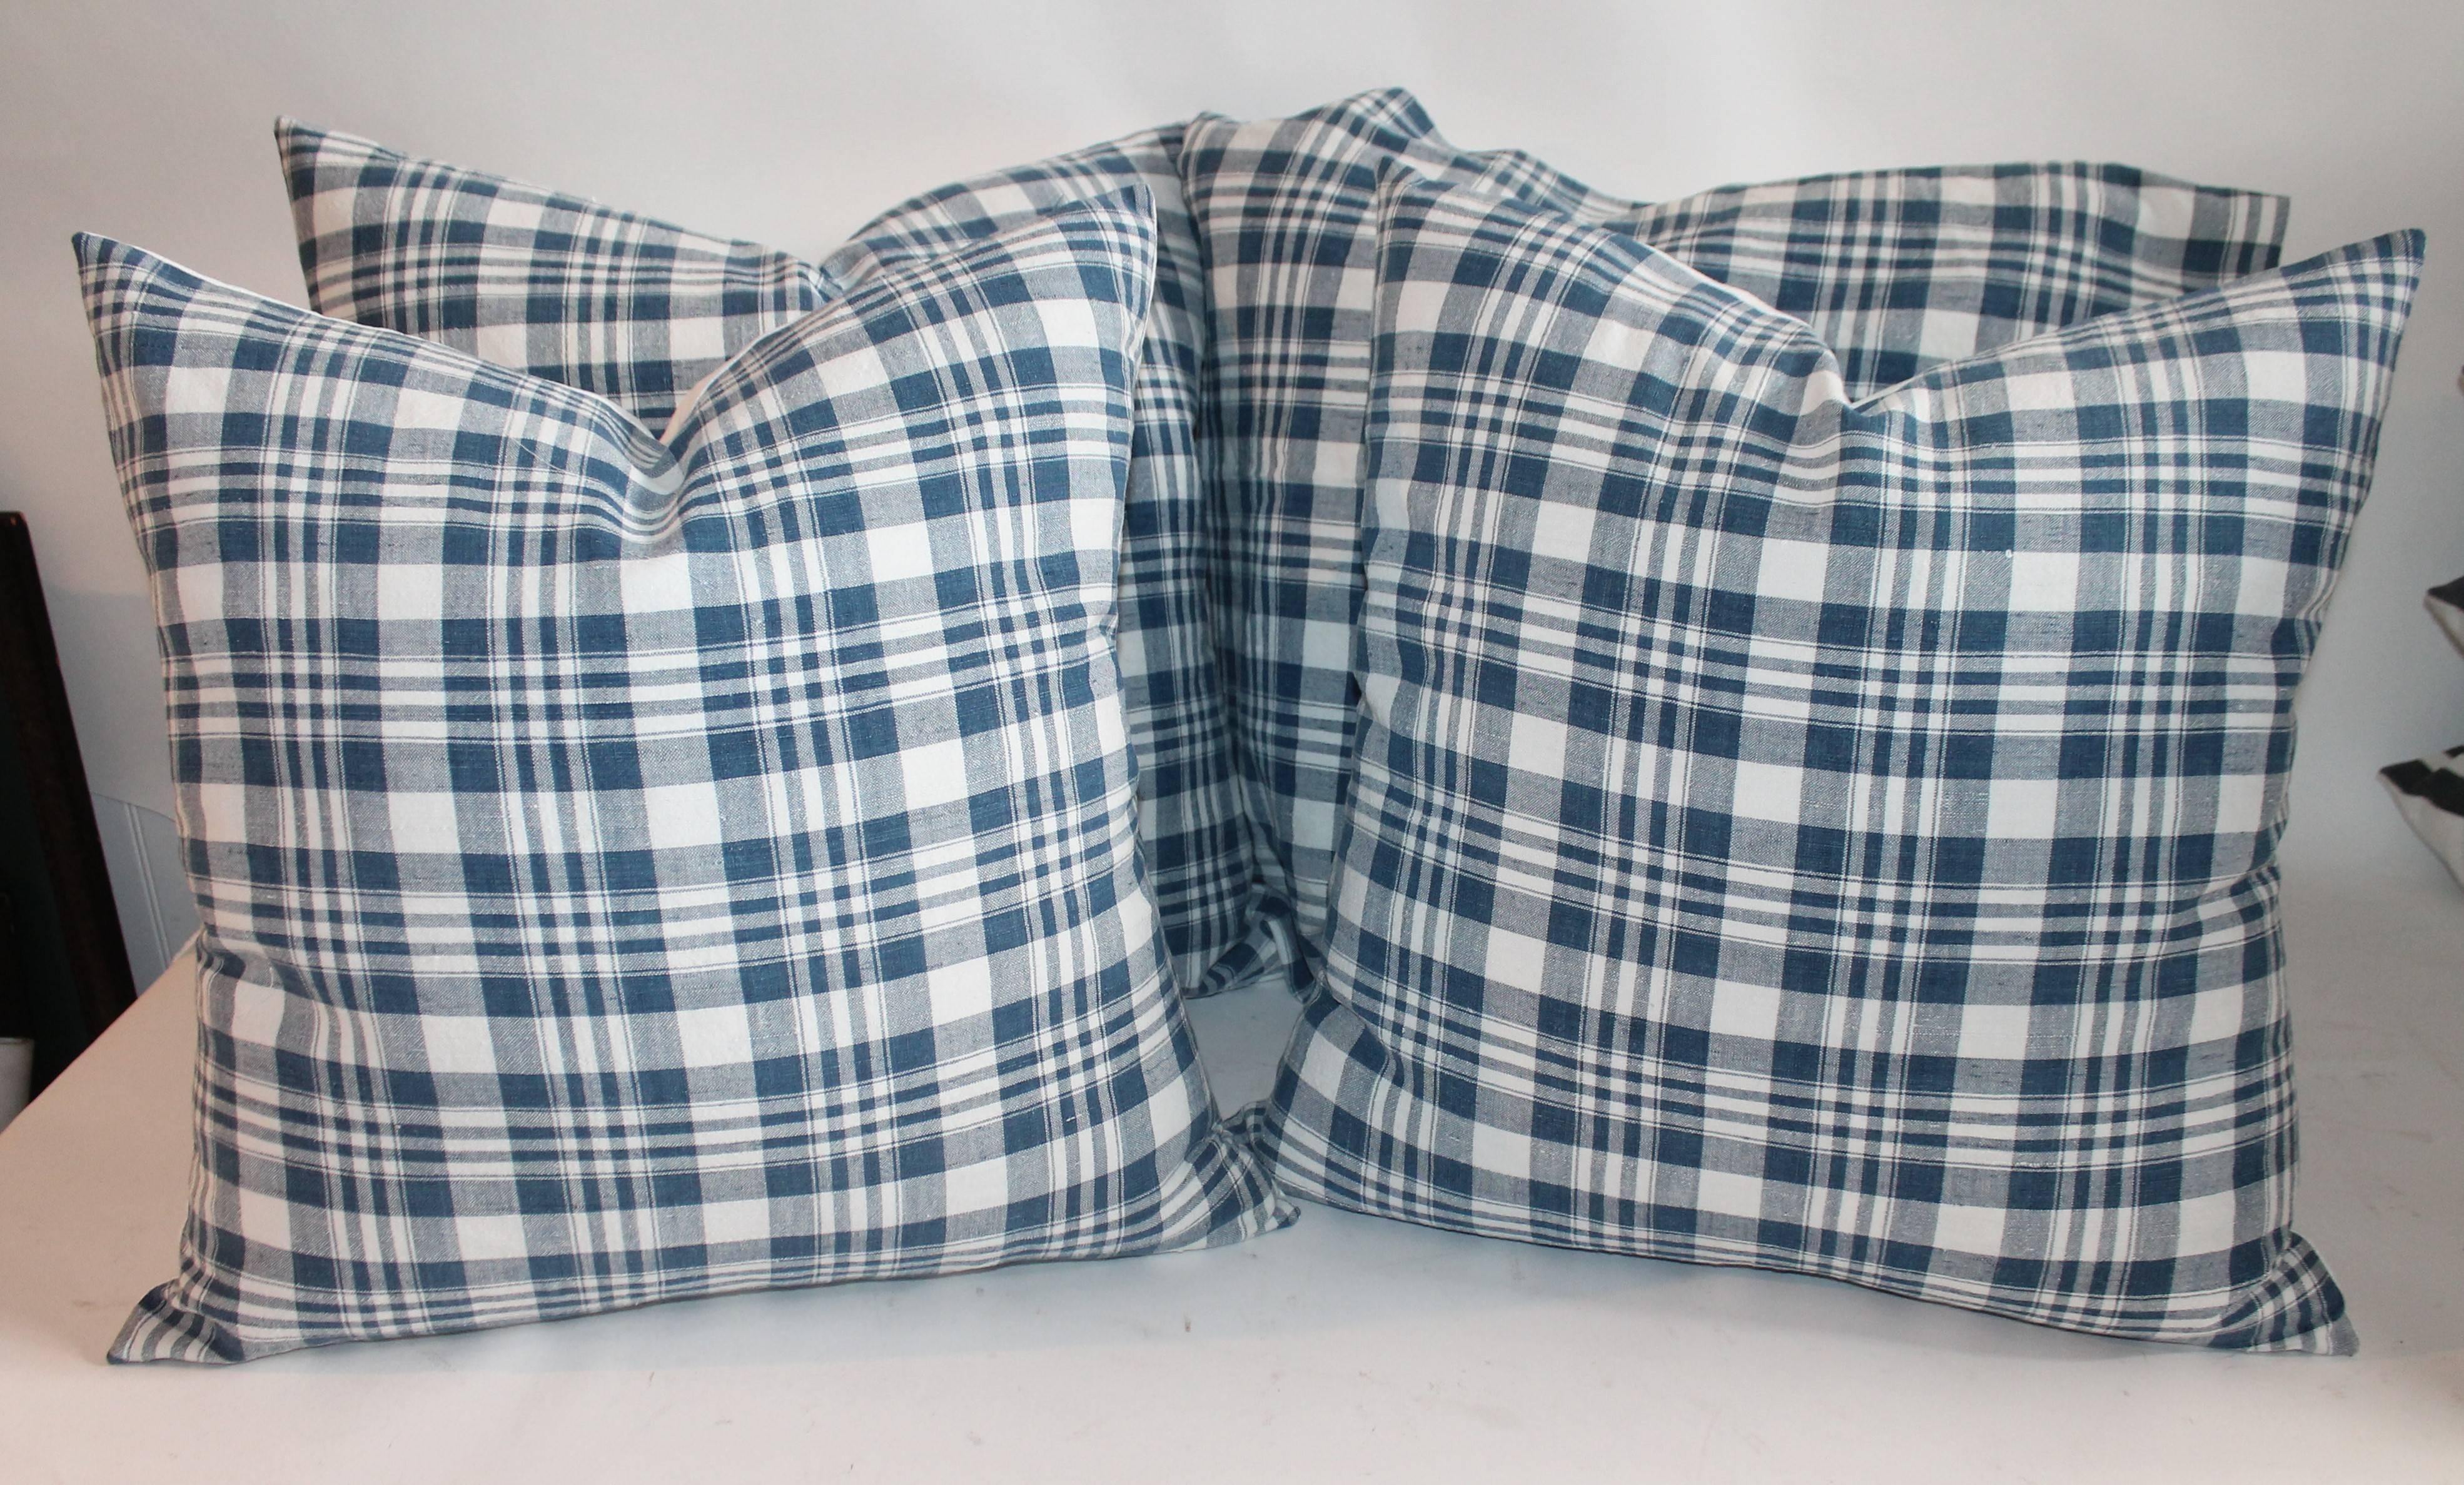 19th century blue and white homespun linen pillows. Measure: Two pairs of 20 x 20 and two pairs of 22 x 22. Sold as pairs.